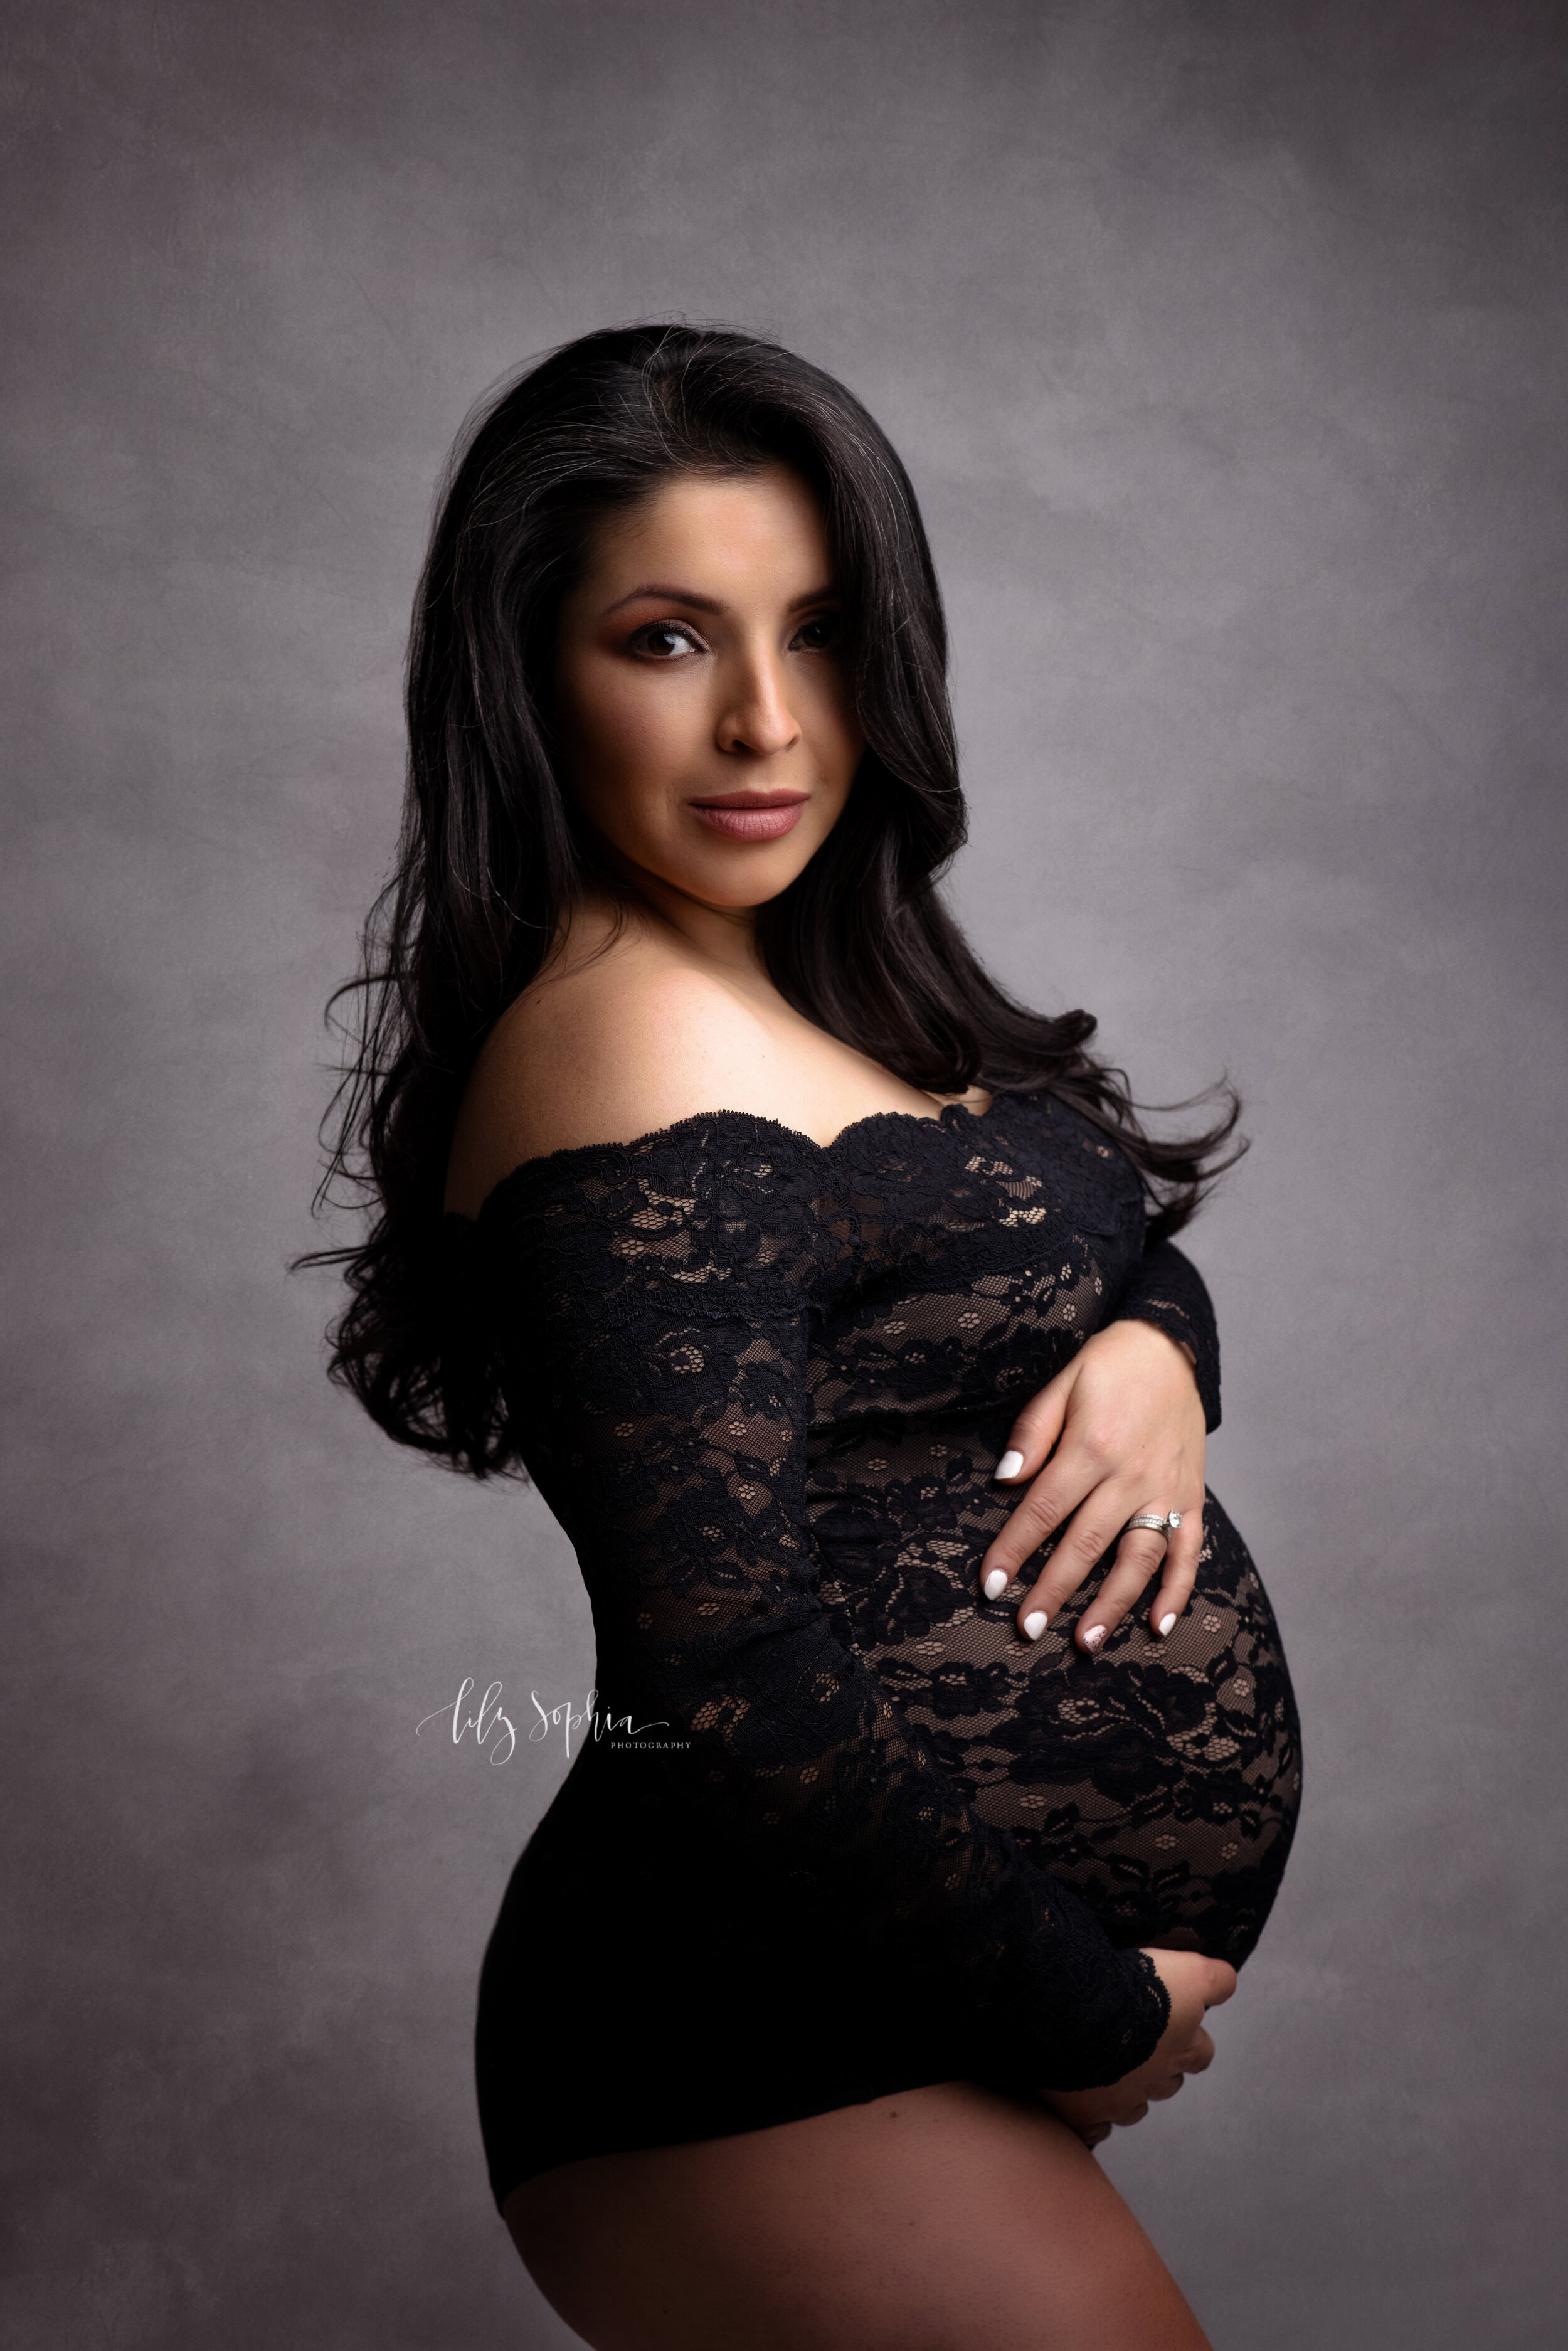  Image of maternity fine art image of beautiful pregnant Hispanic woman with long dark hair dressed in black lace bodysuit standing in front of a textured background in the Atlanta studio of Lily Sophia Photography.  